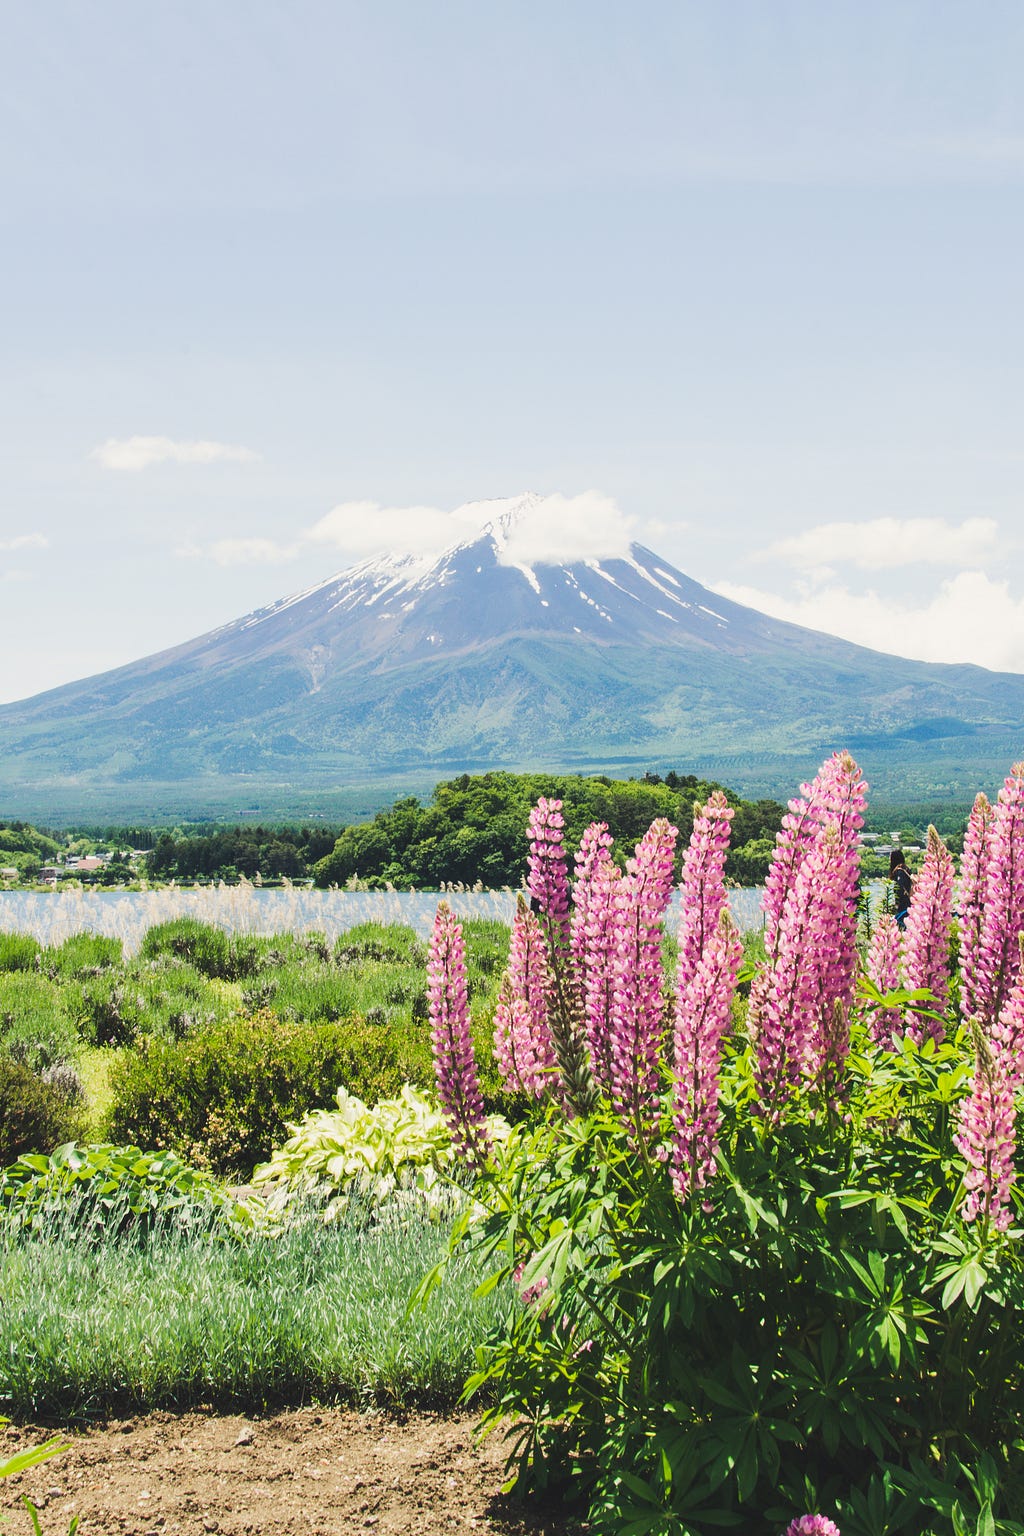 A sunny meadow in Japan, looking up to a great mountain.